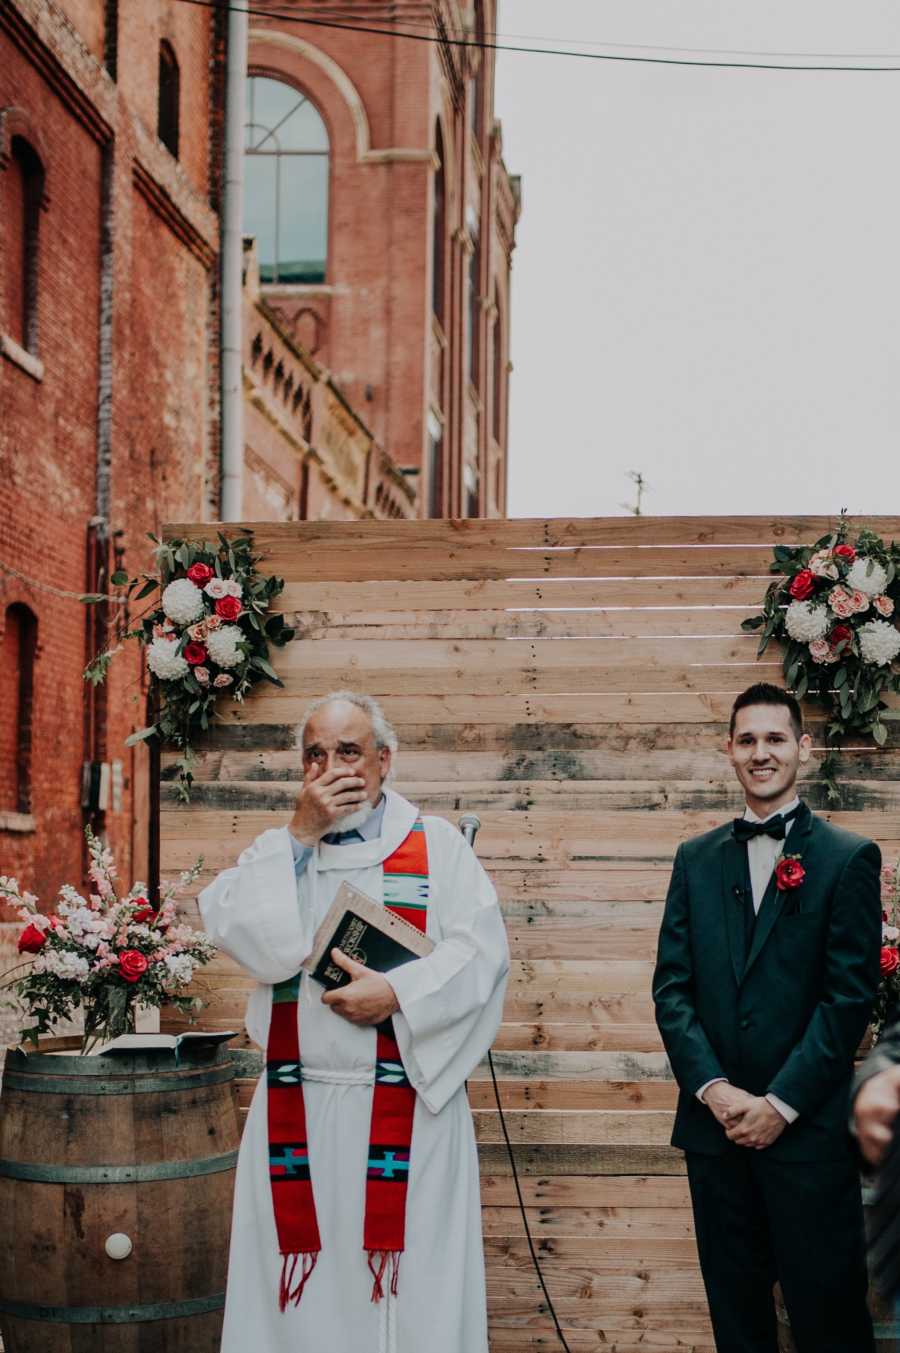 Groom smiles watching bride walk down the aisle while stepdad stands with hand over his mouth